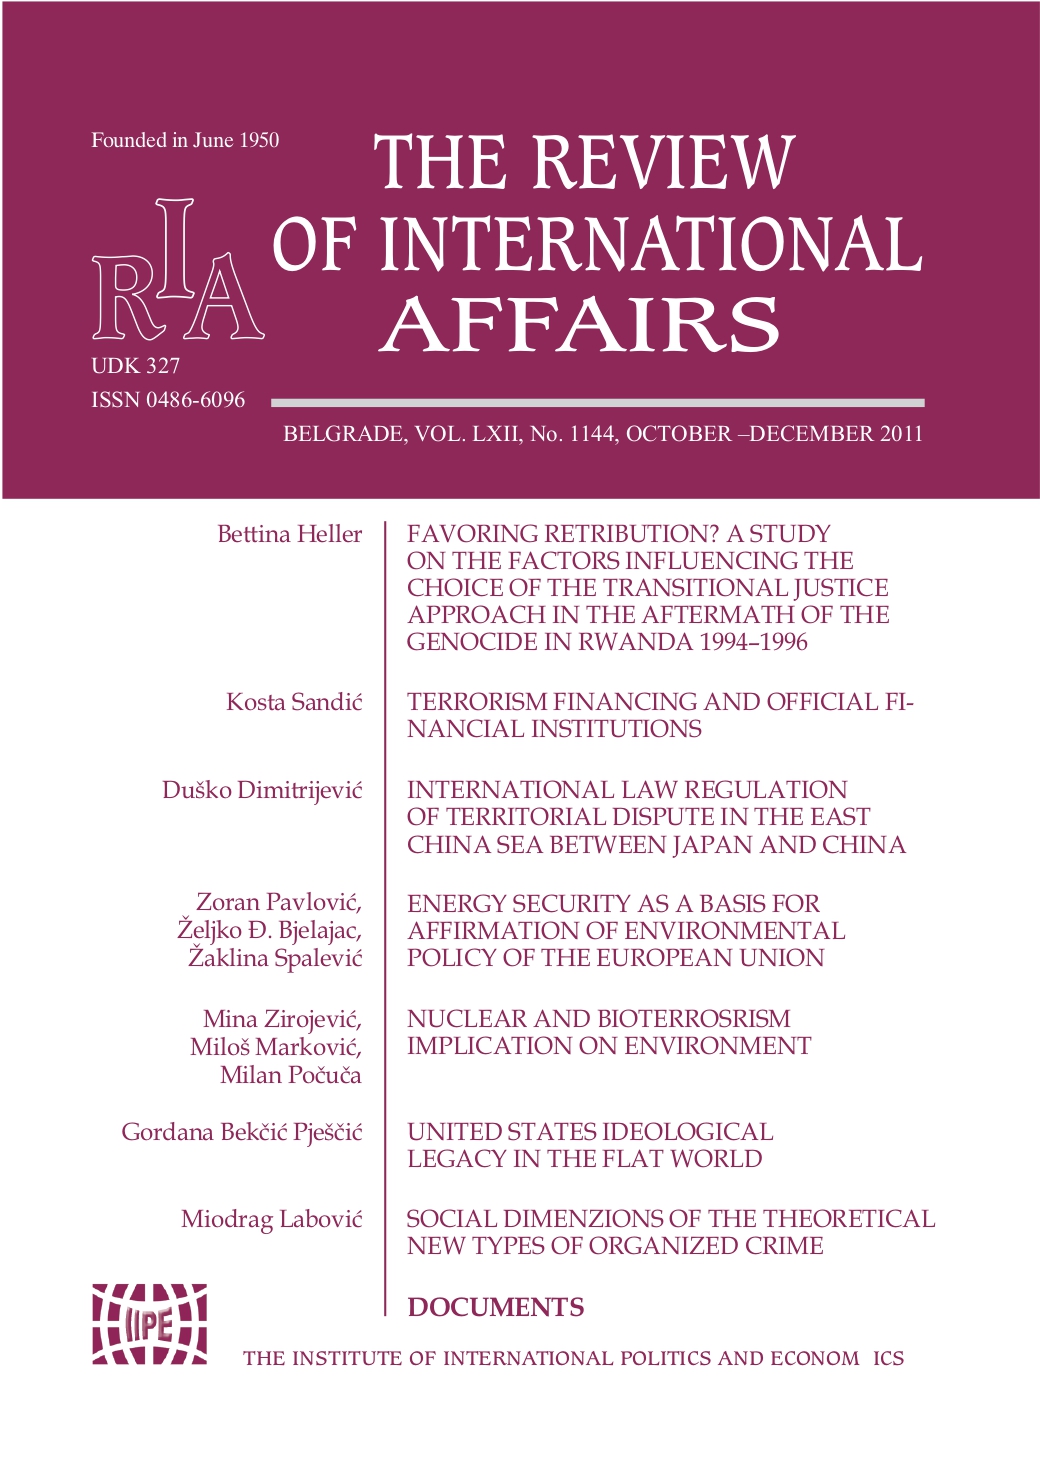 International Law Regulation of Territorial Dispute in the East China Sea Between Japan and China Cover Image